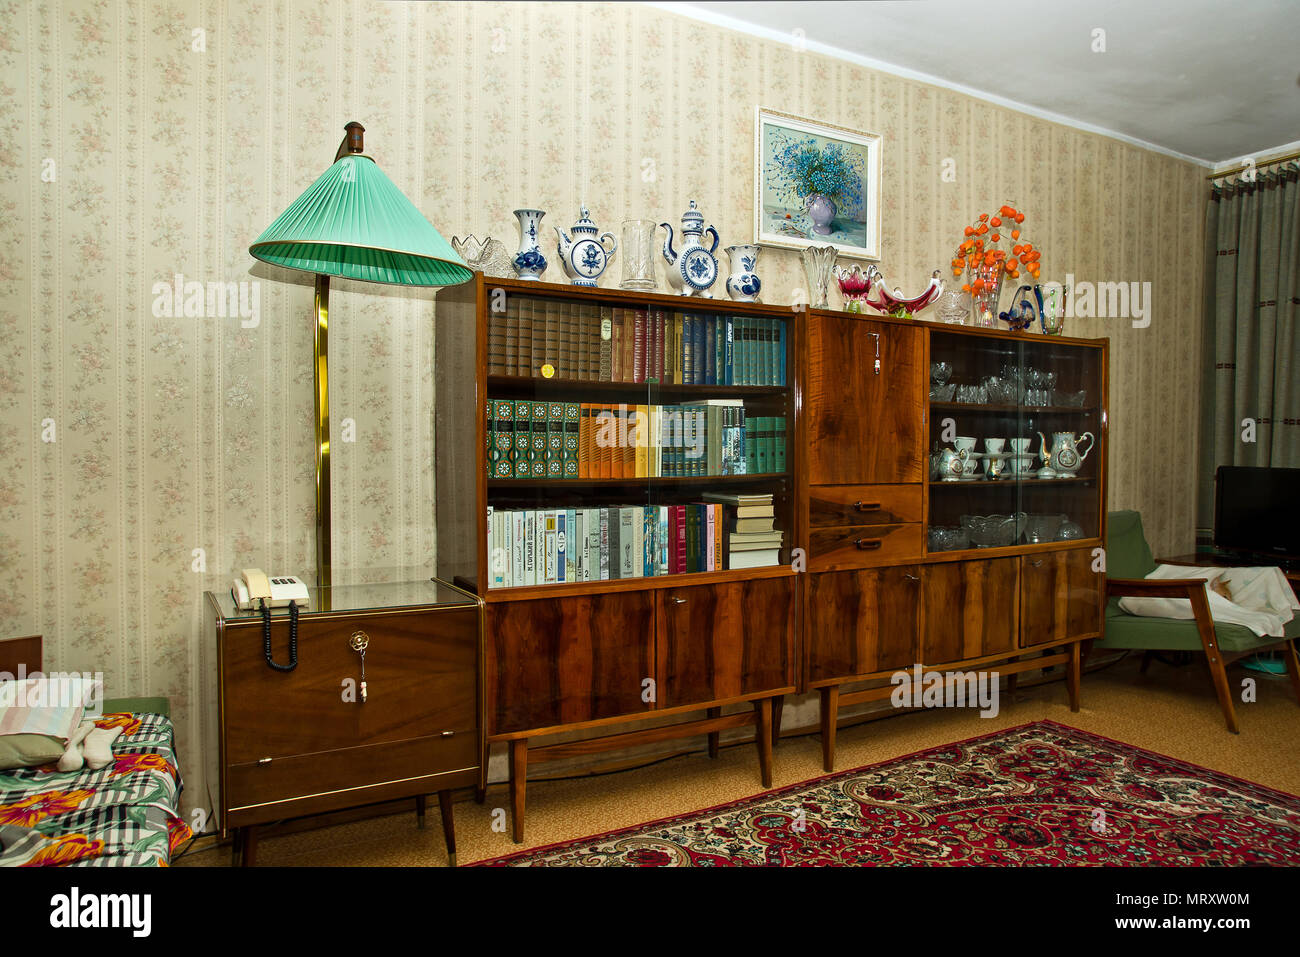 Vintage soviet room interior, typical flat in Moscow, Russia Stock ...